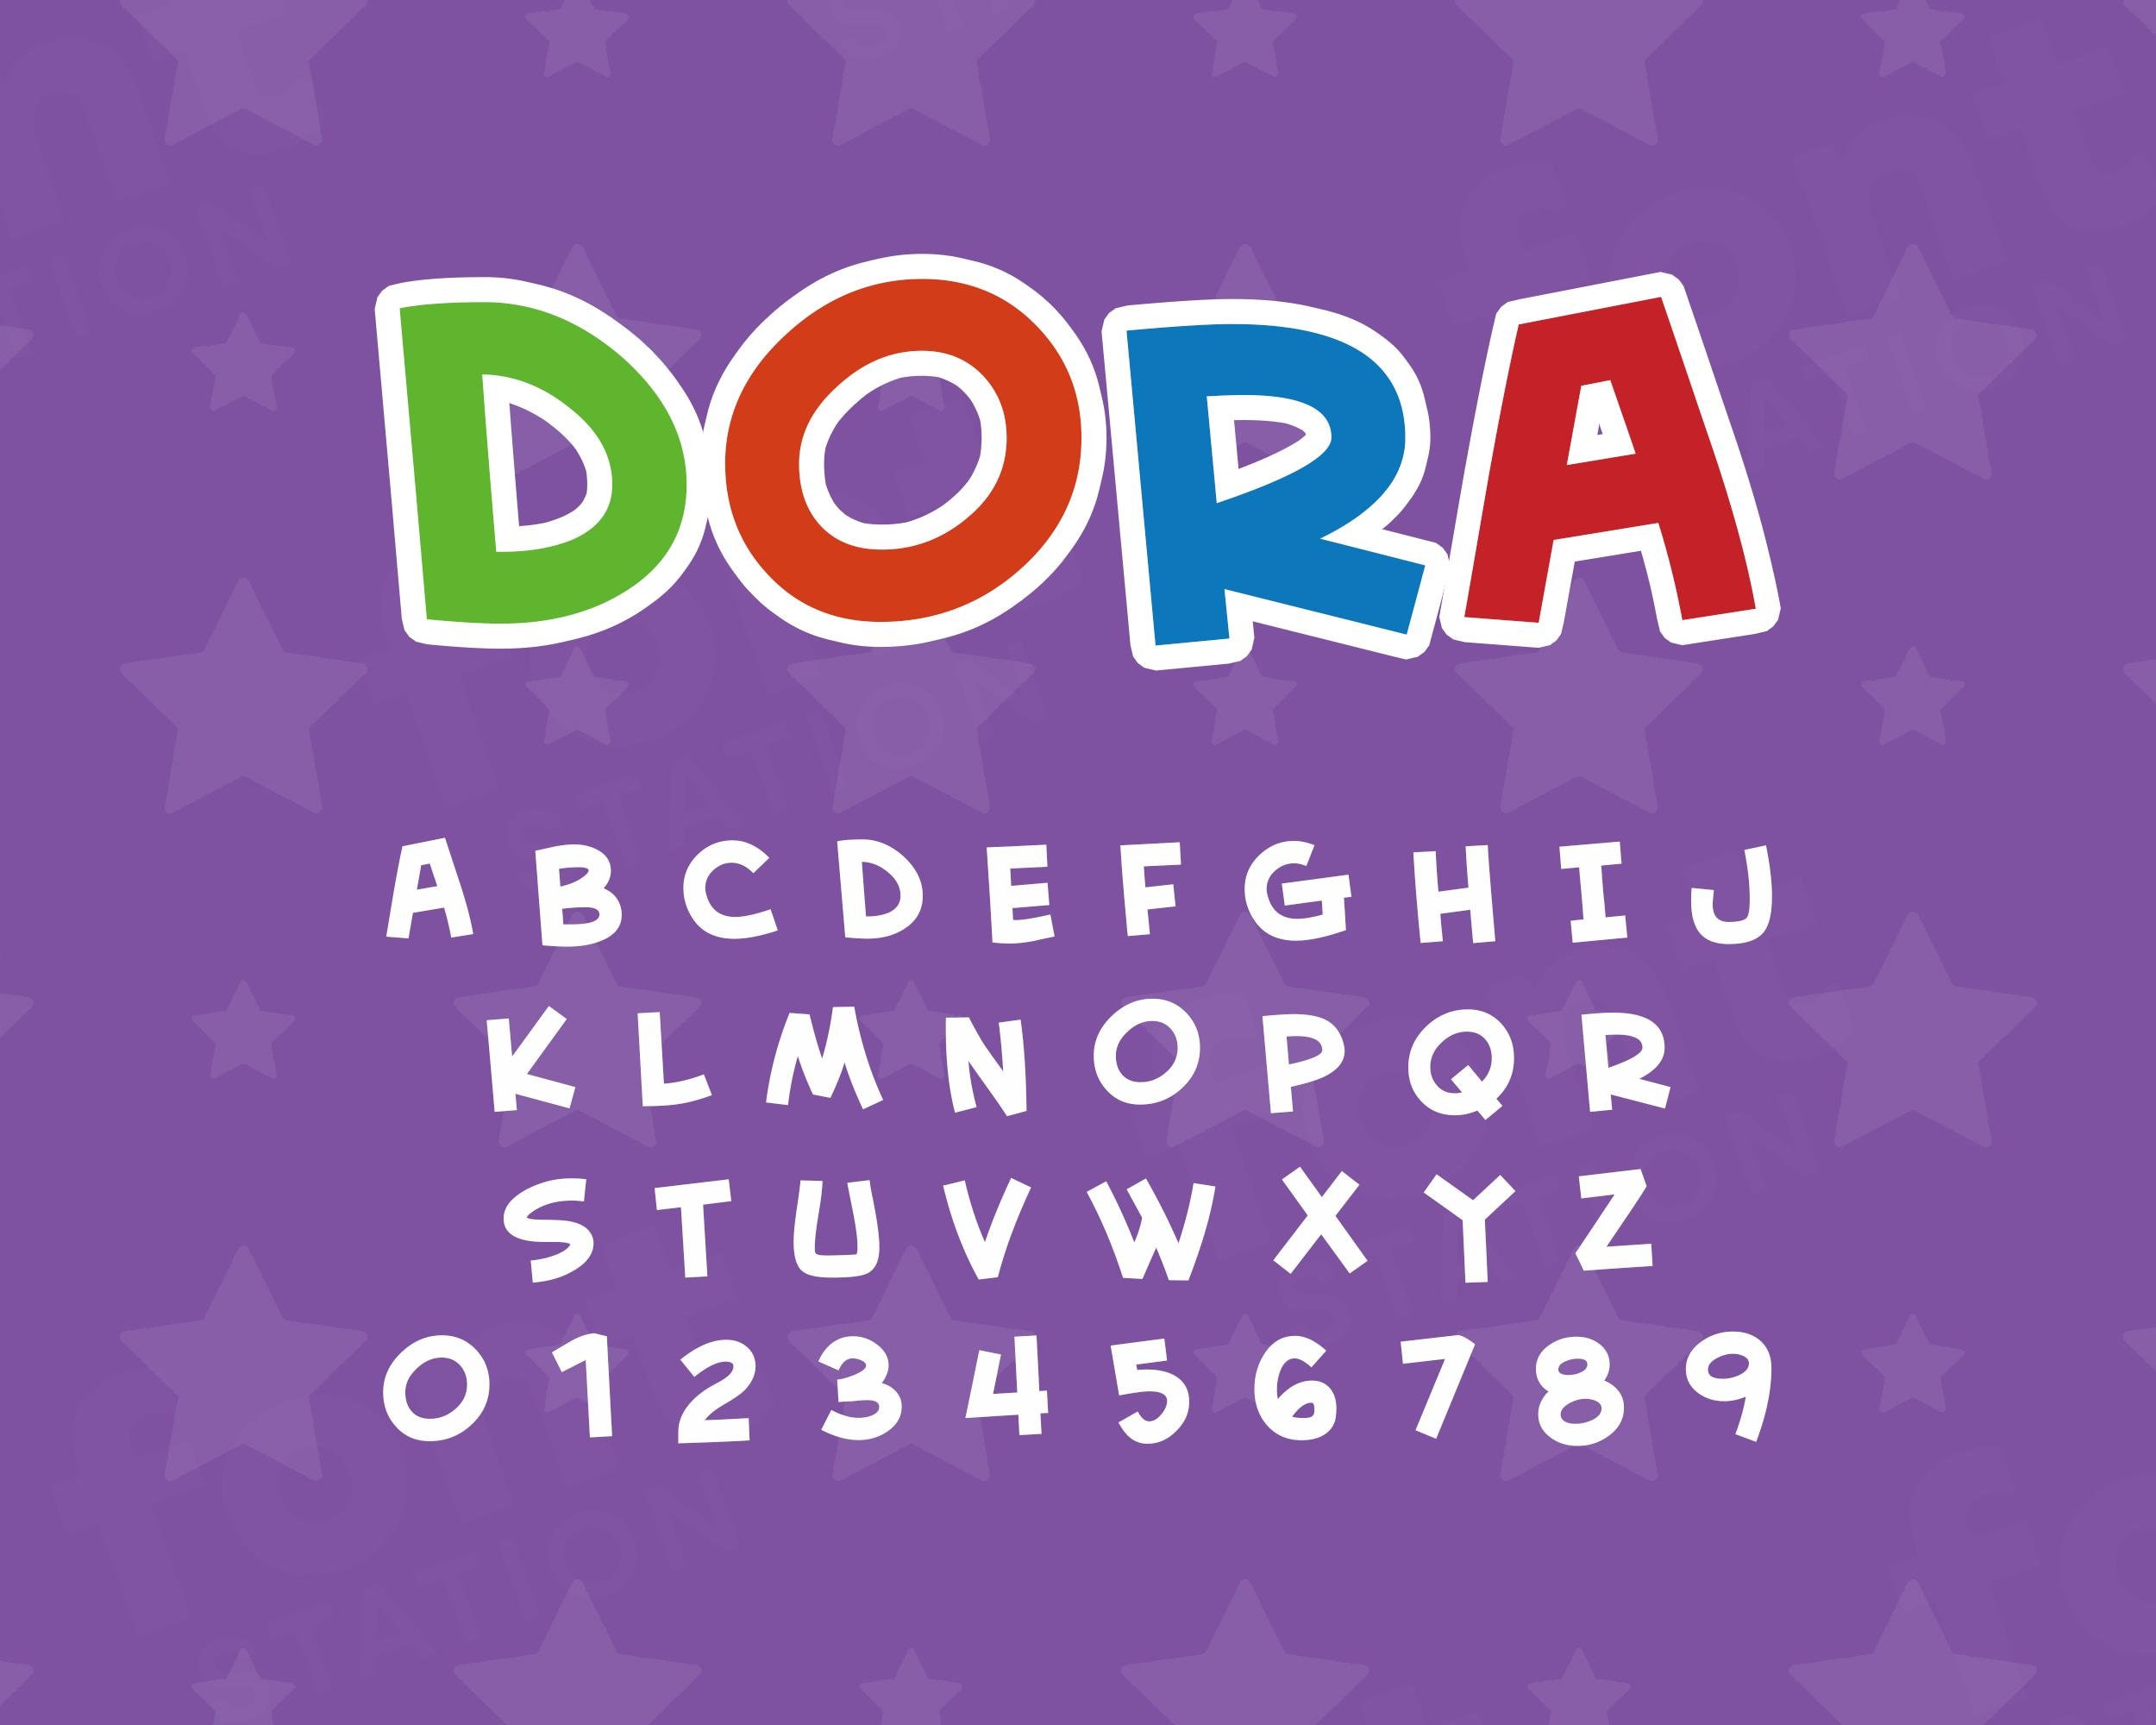 Get Creative with Dora Monkey, Dora the Explorer, and Cartoon Cookie Cutters  - Buy Now!